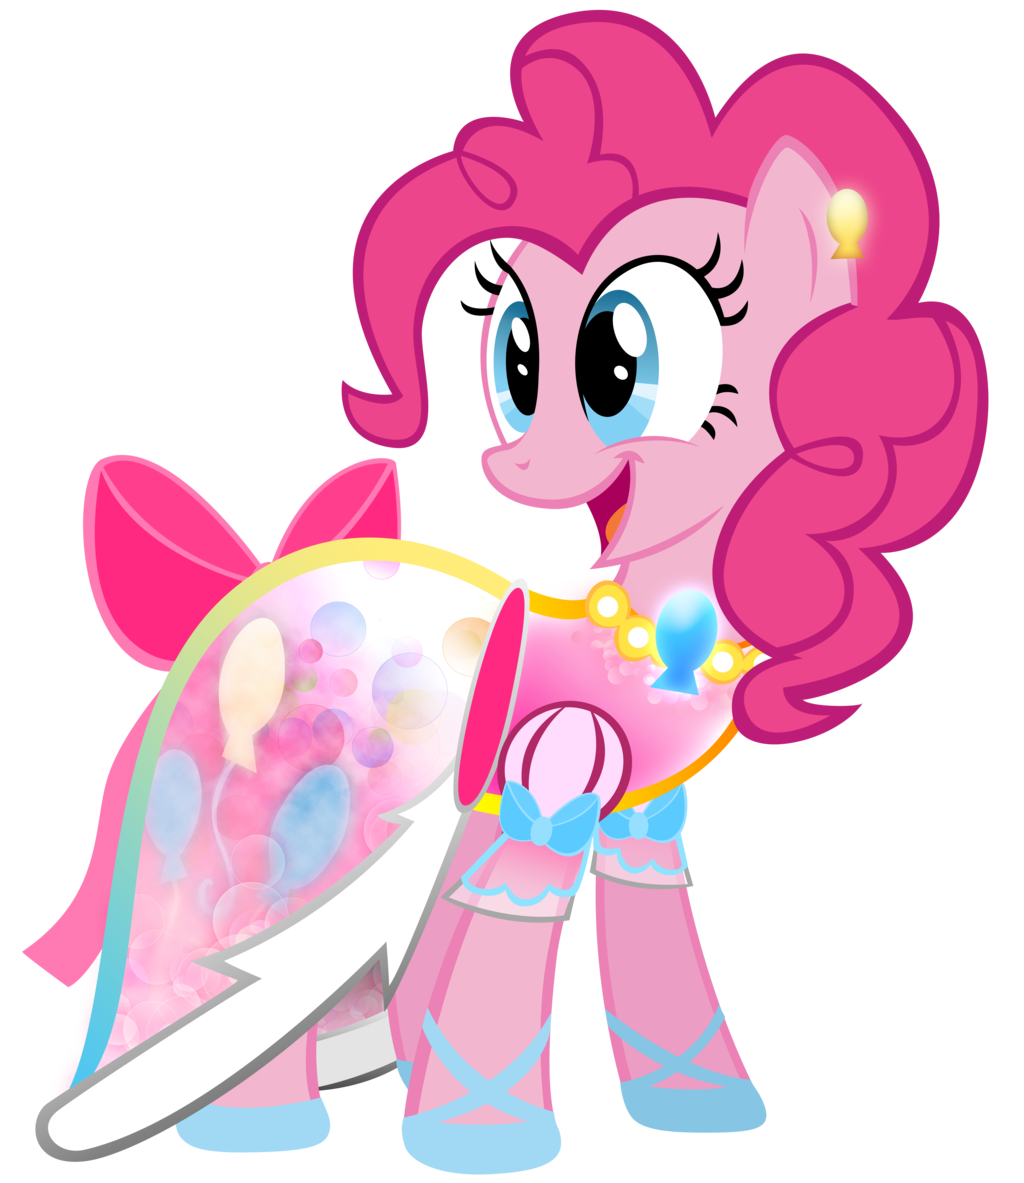 Pinkie_Pie_in_a_dress_complete_with_a_ne